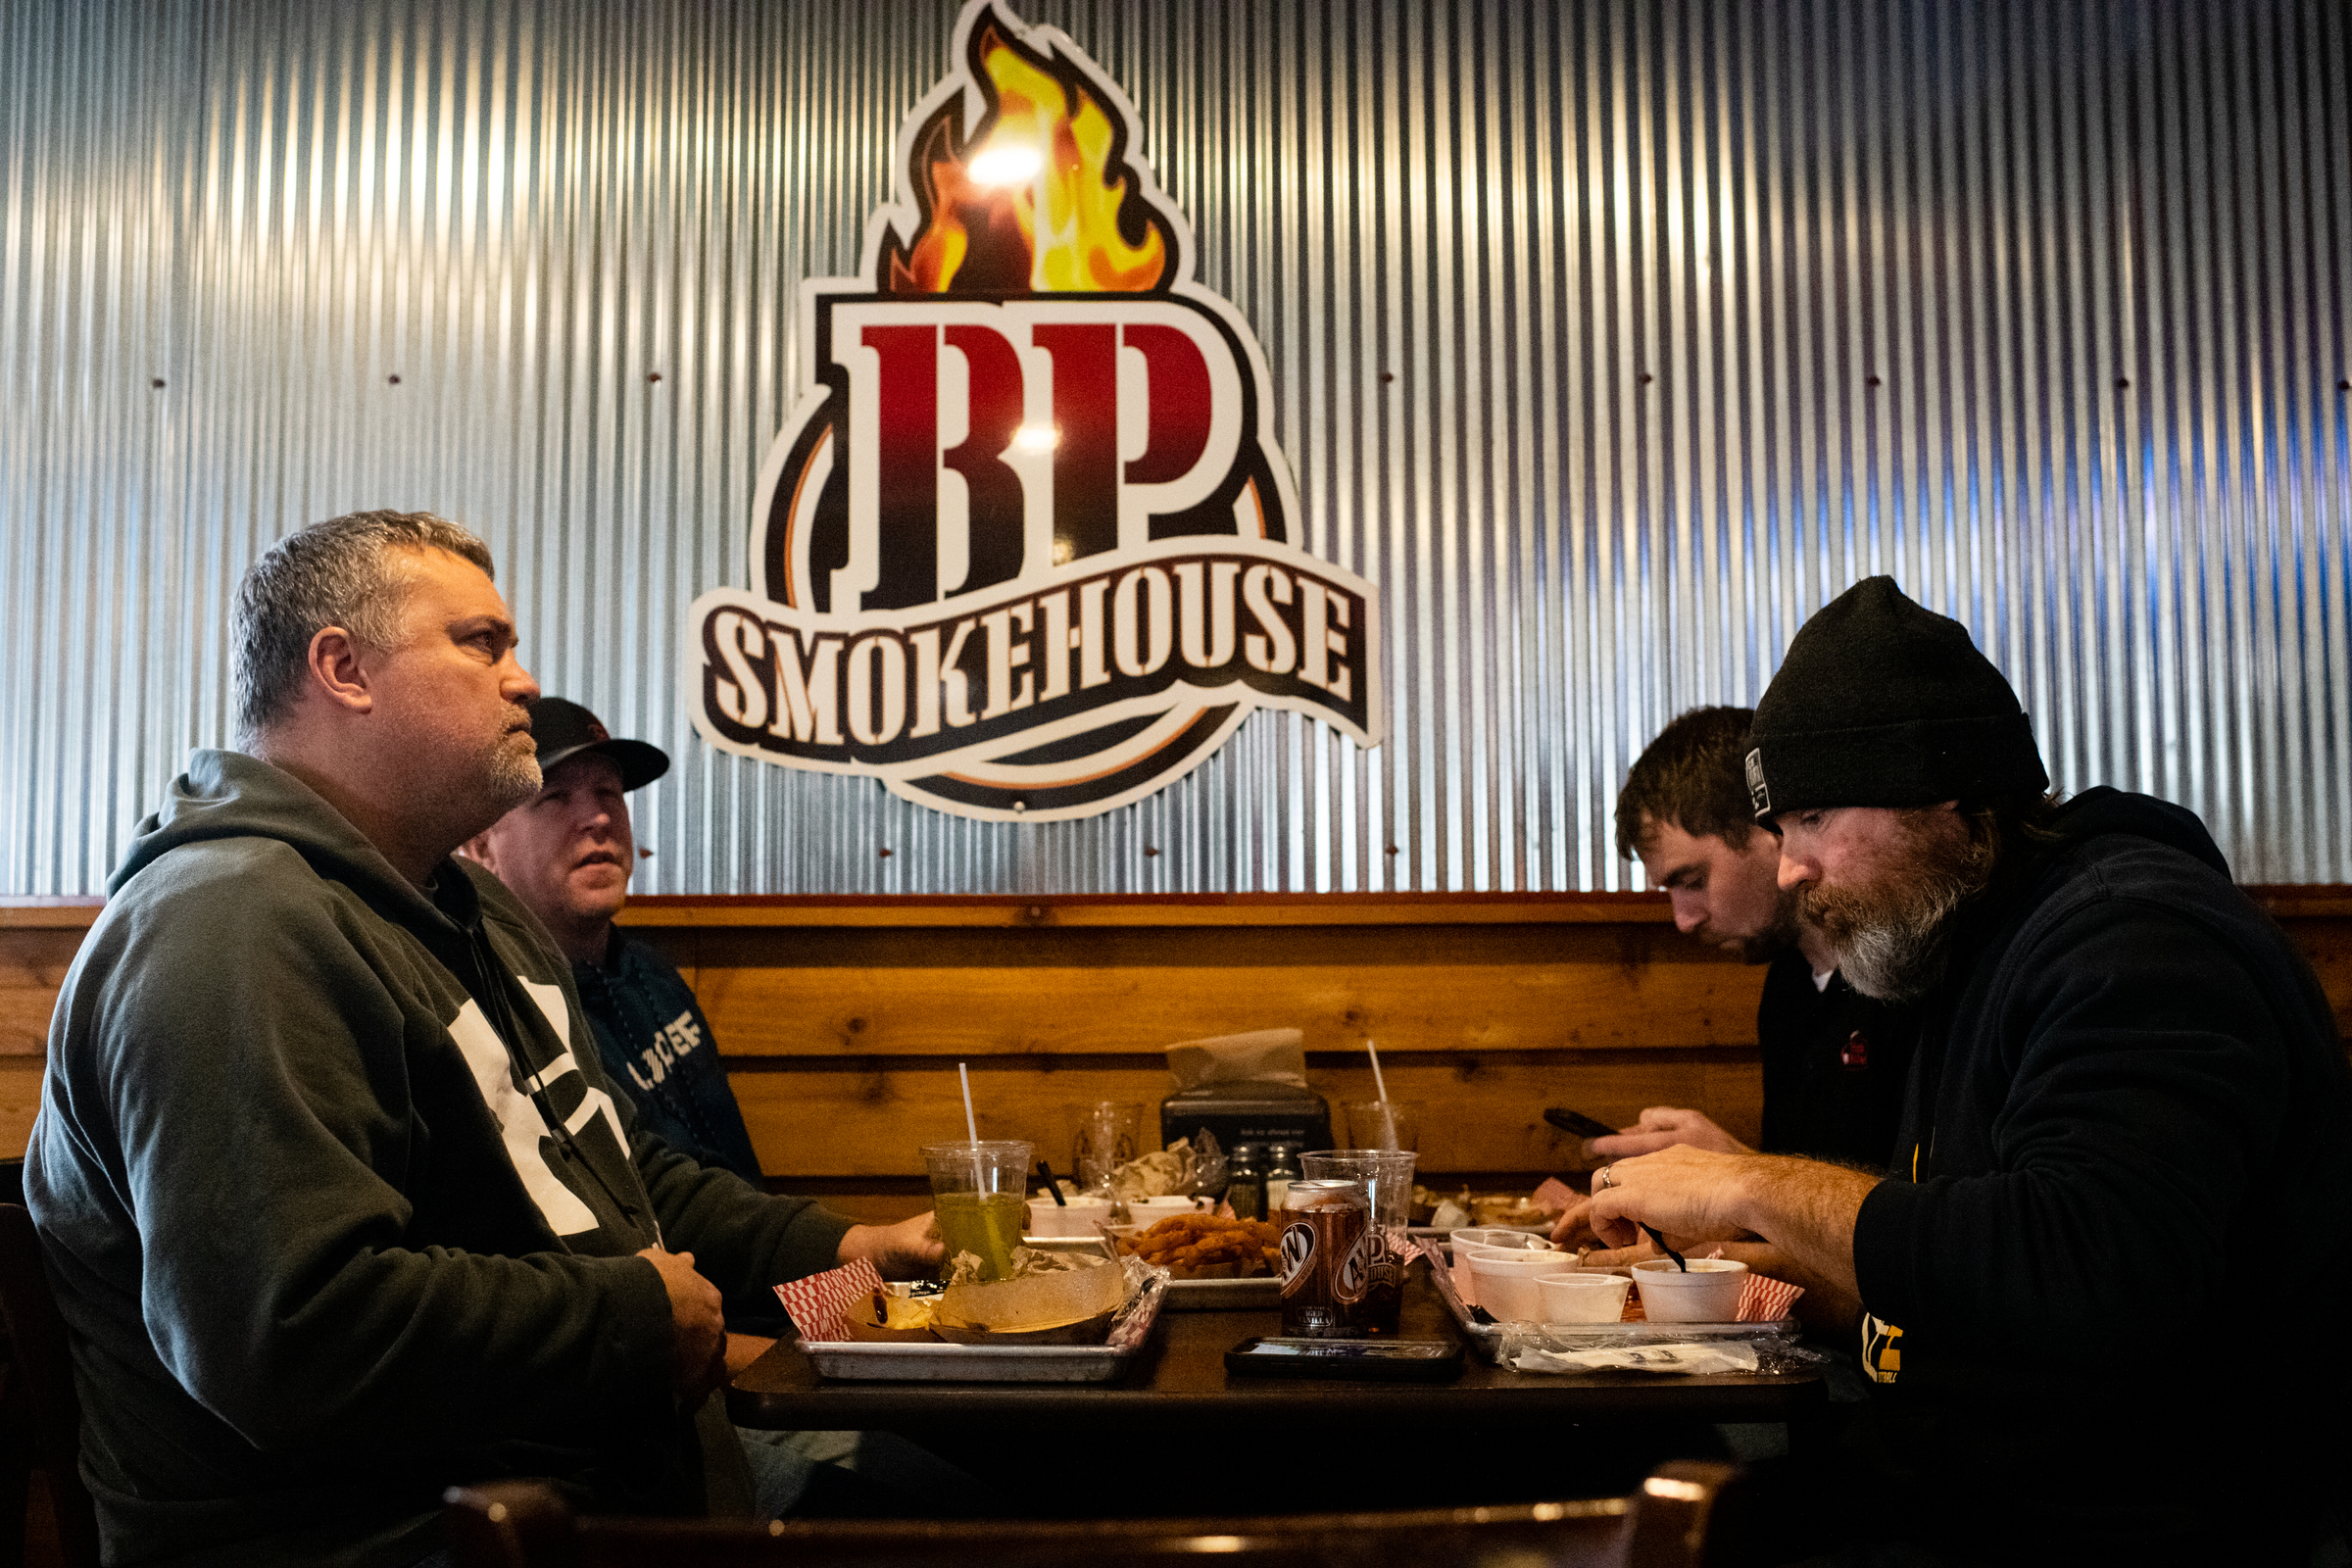 Customers eat lunch at BP Smokehouse in Tomah, Wis.